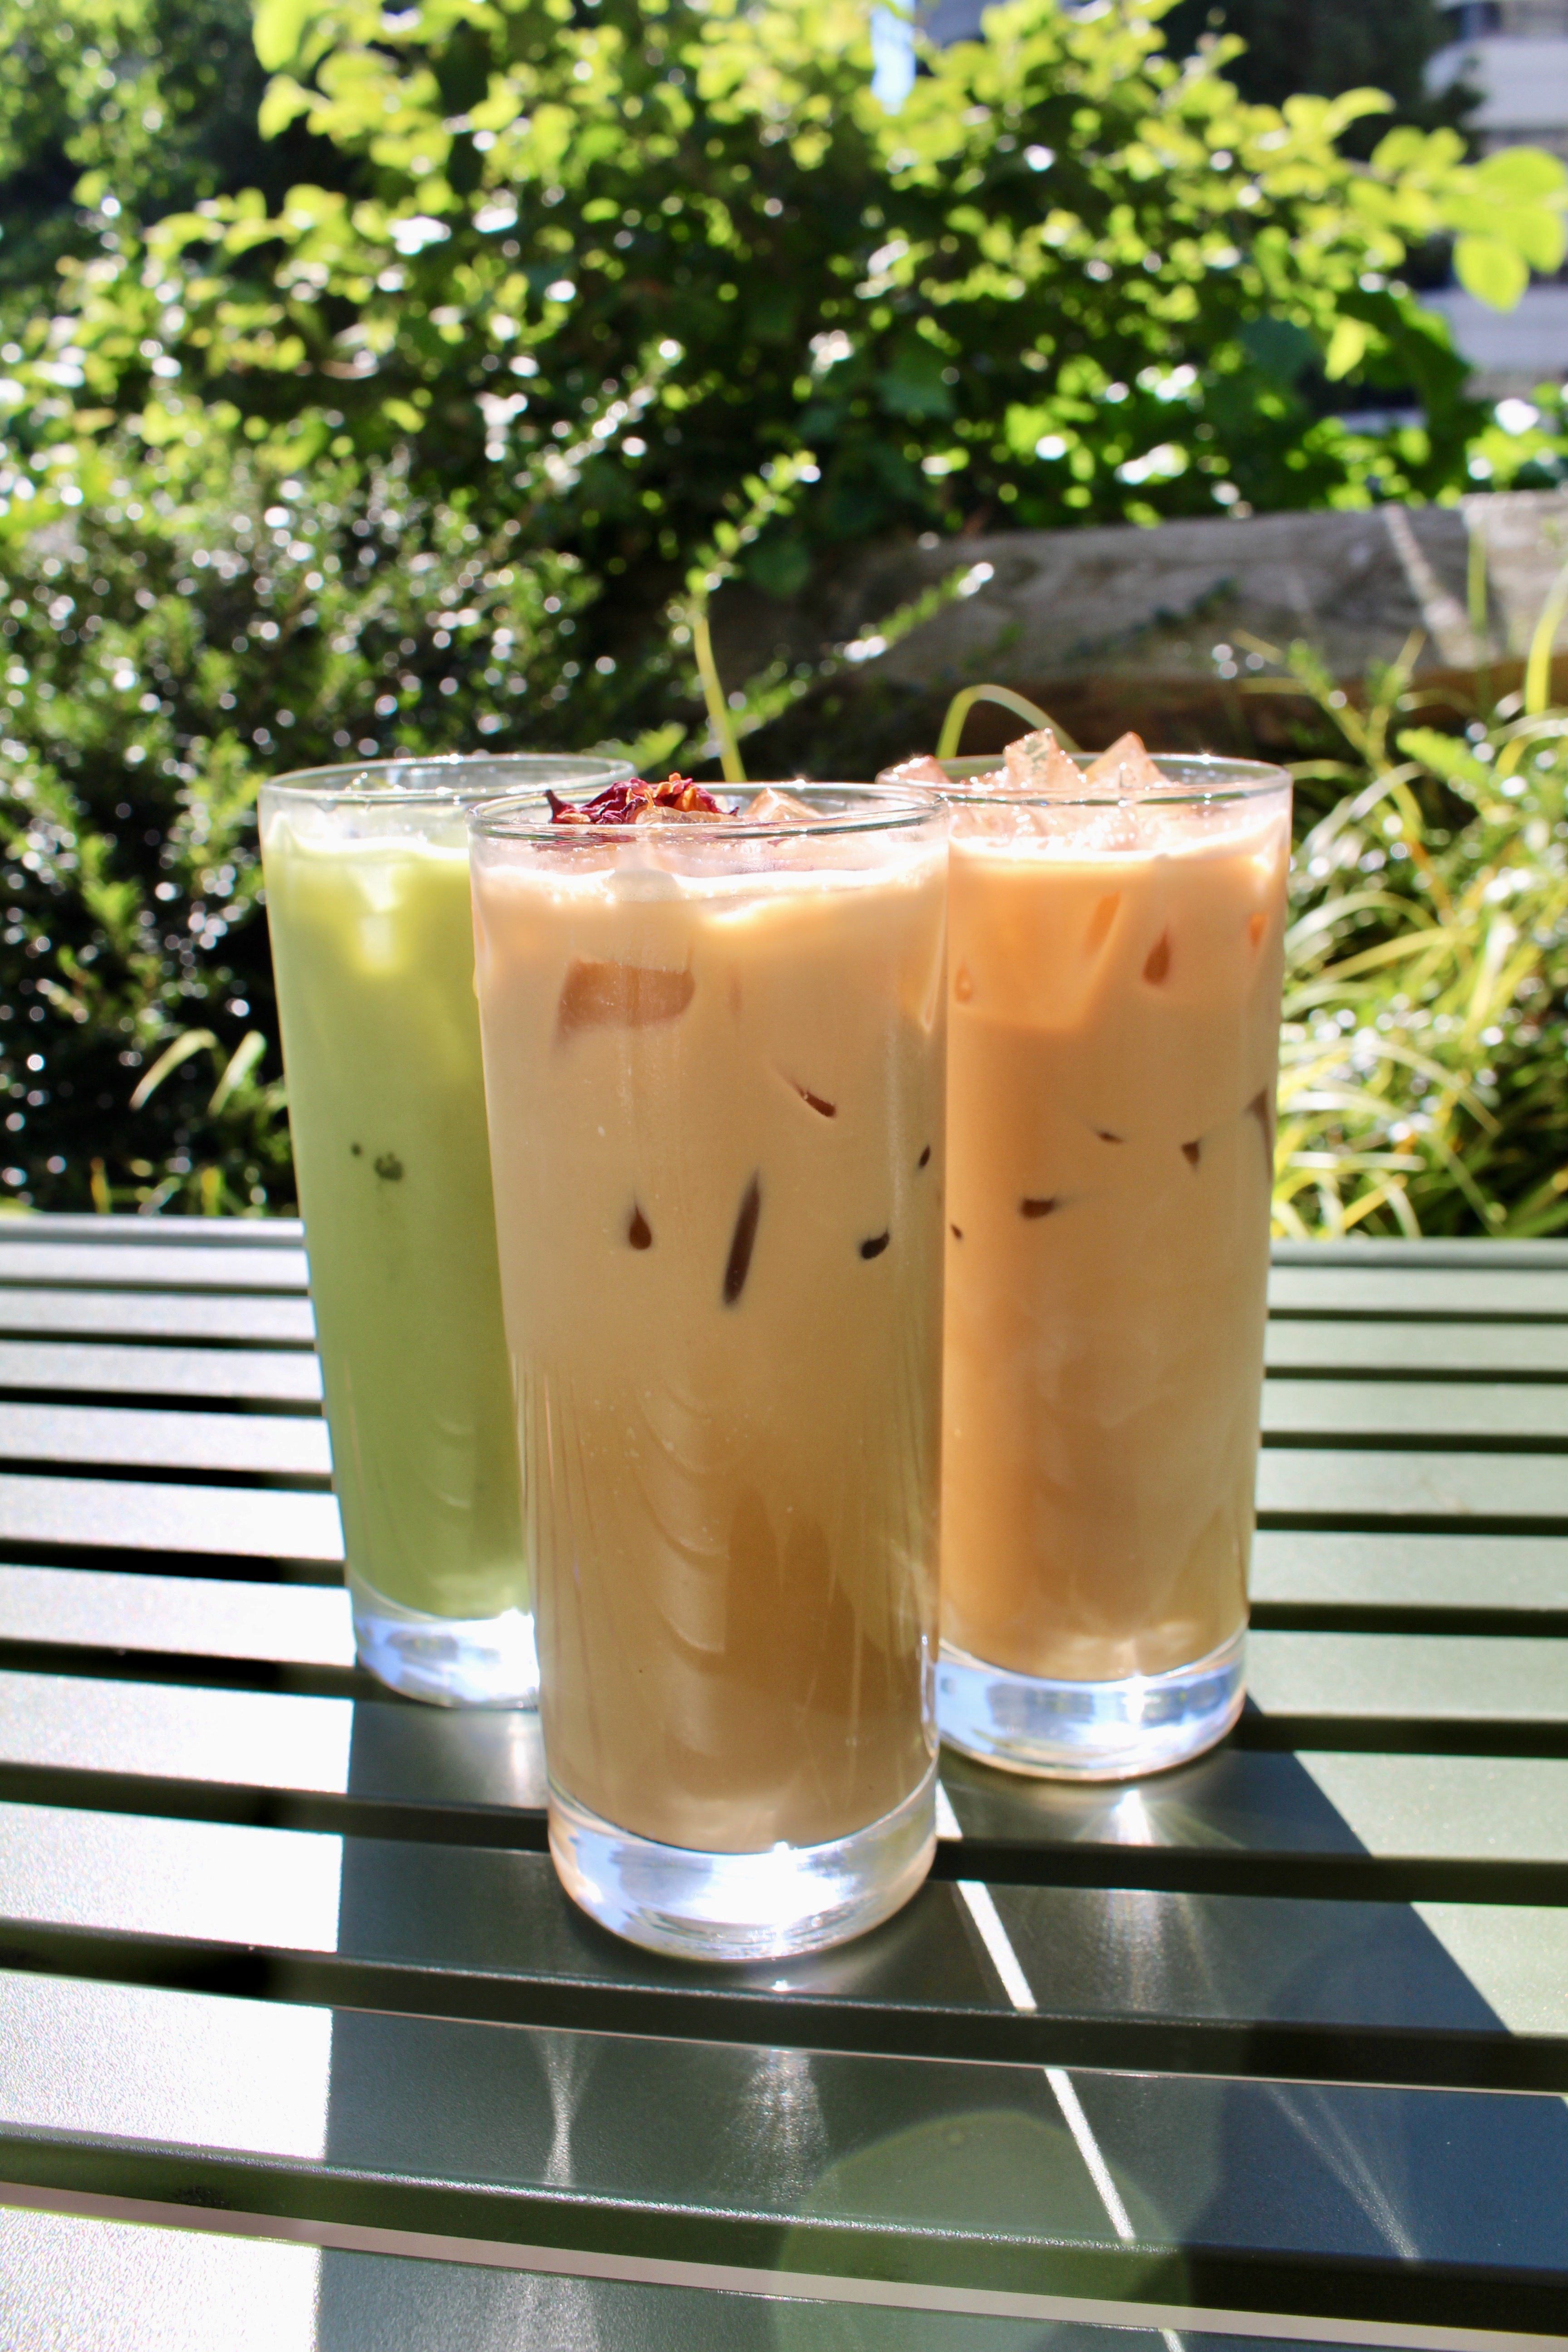 Three tall glasses arranged in a triangle shape on a green metal outdoor table with horizontal slats. The sun shines brightly on the green shrubs growing in the background, light glinting off the ice cubes in the 3 lattes. From left to right: green iced lavender matcha latte, center is iced rose tahini latte glass that is coffee-colored with rose petal garnish floating on top, right is an iced oat milk lavender latte the color of coffee.